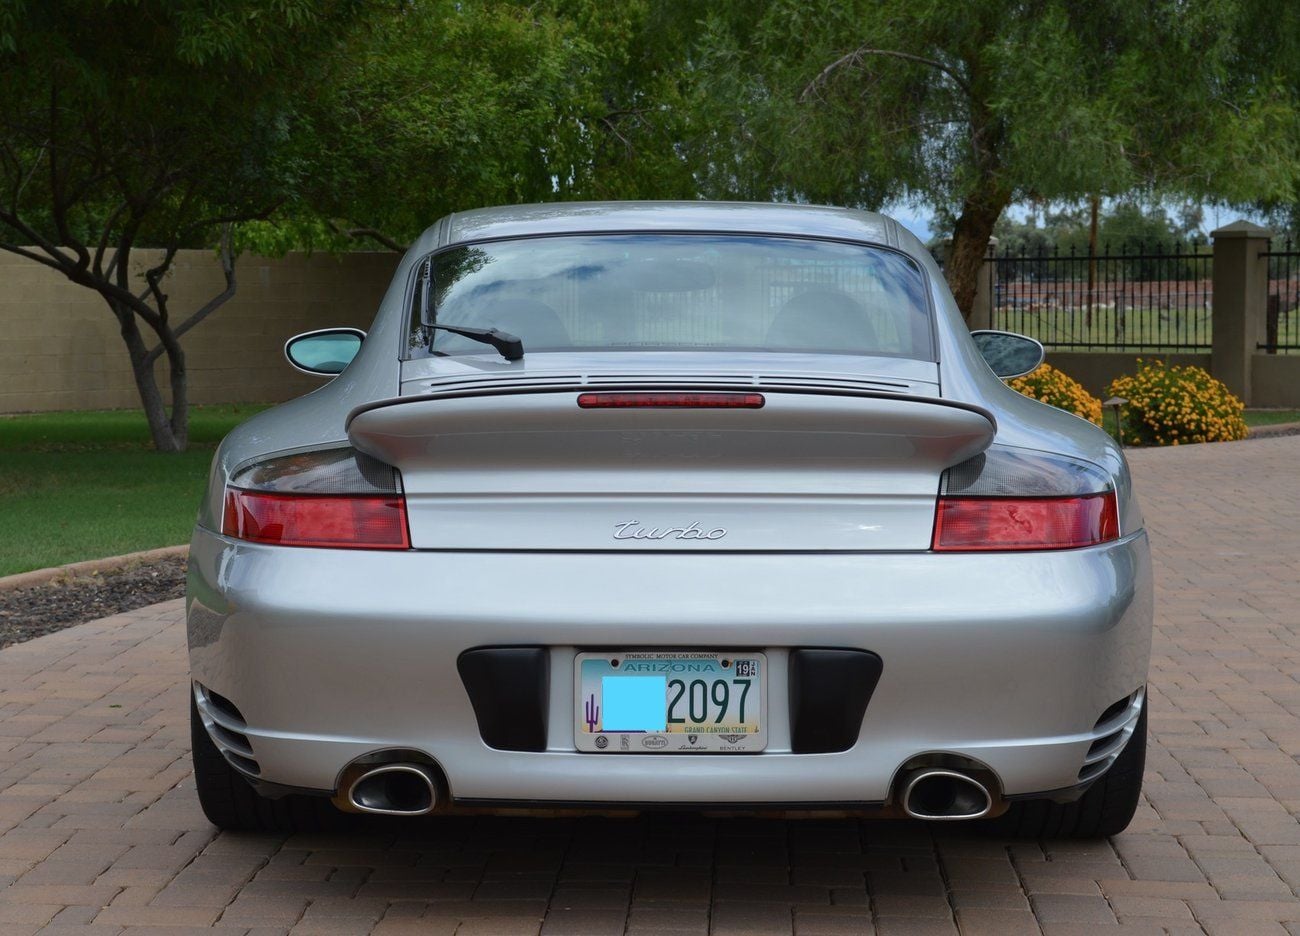 2003 Porsche 911 - 2003 996 Turbo Tip 19k miles, near mint condition - Used - VIN WP0AB29923S685252 - 19,610 Miles - 6 cyl - AWD - Automatic - Coupe - Silver - Gilbert, AZ 85296, United States